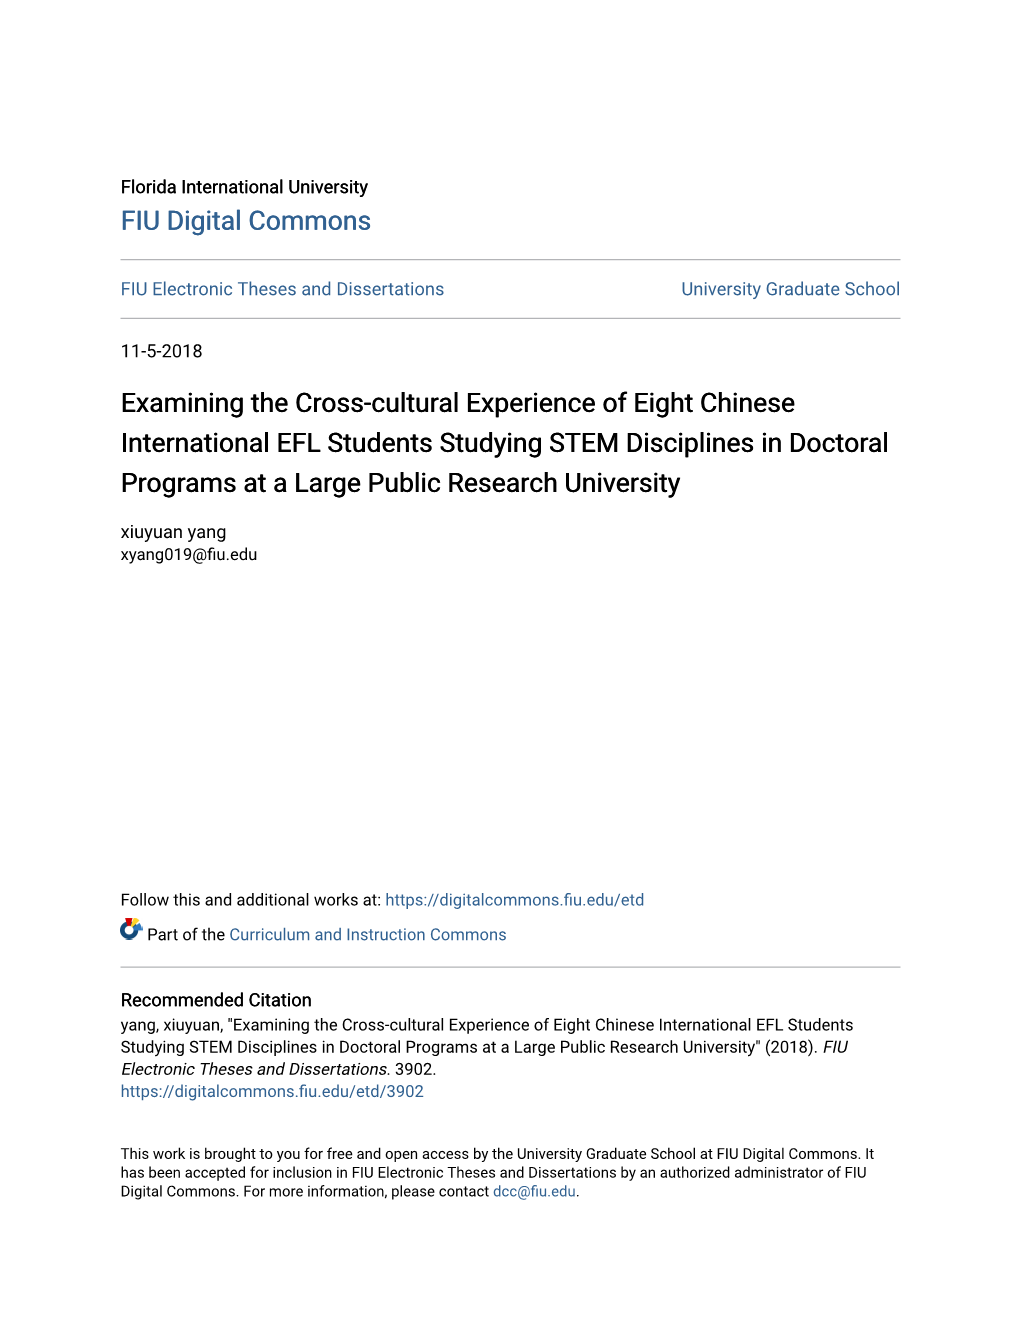 Examining the Cross-Cultural Experience of Eight Chinese International EFL Students Studying STEM Disciplines in Doctoral Progra